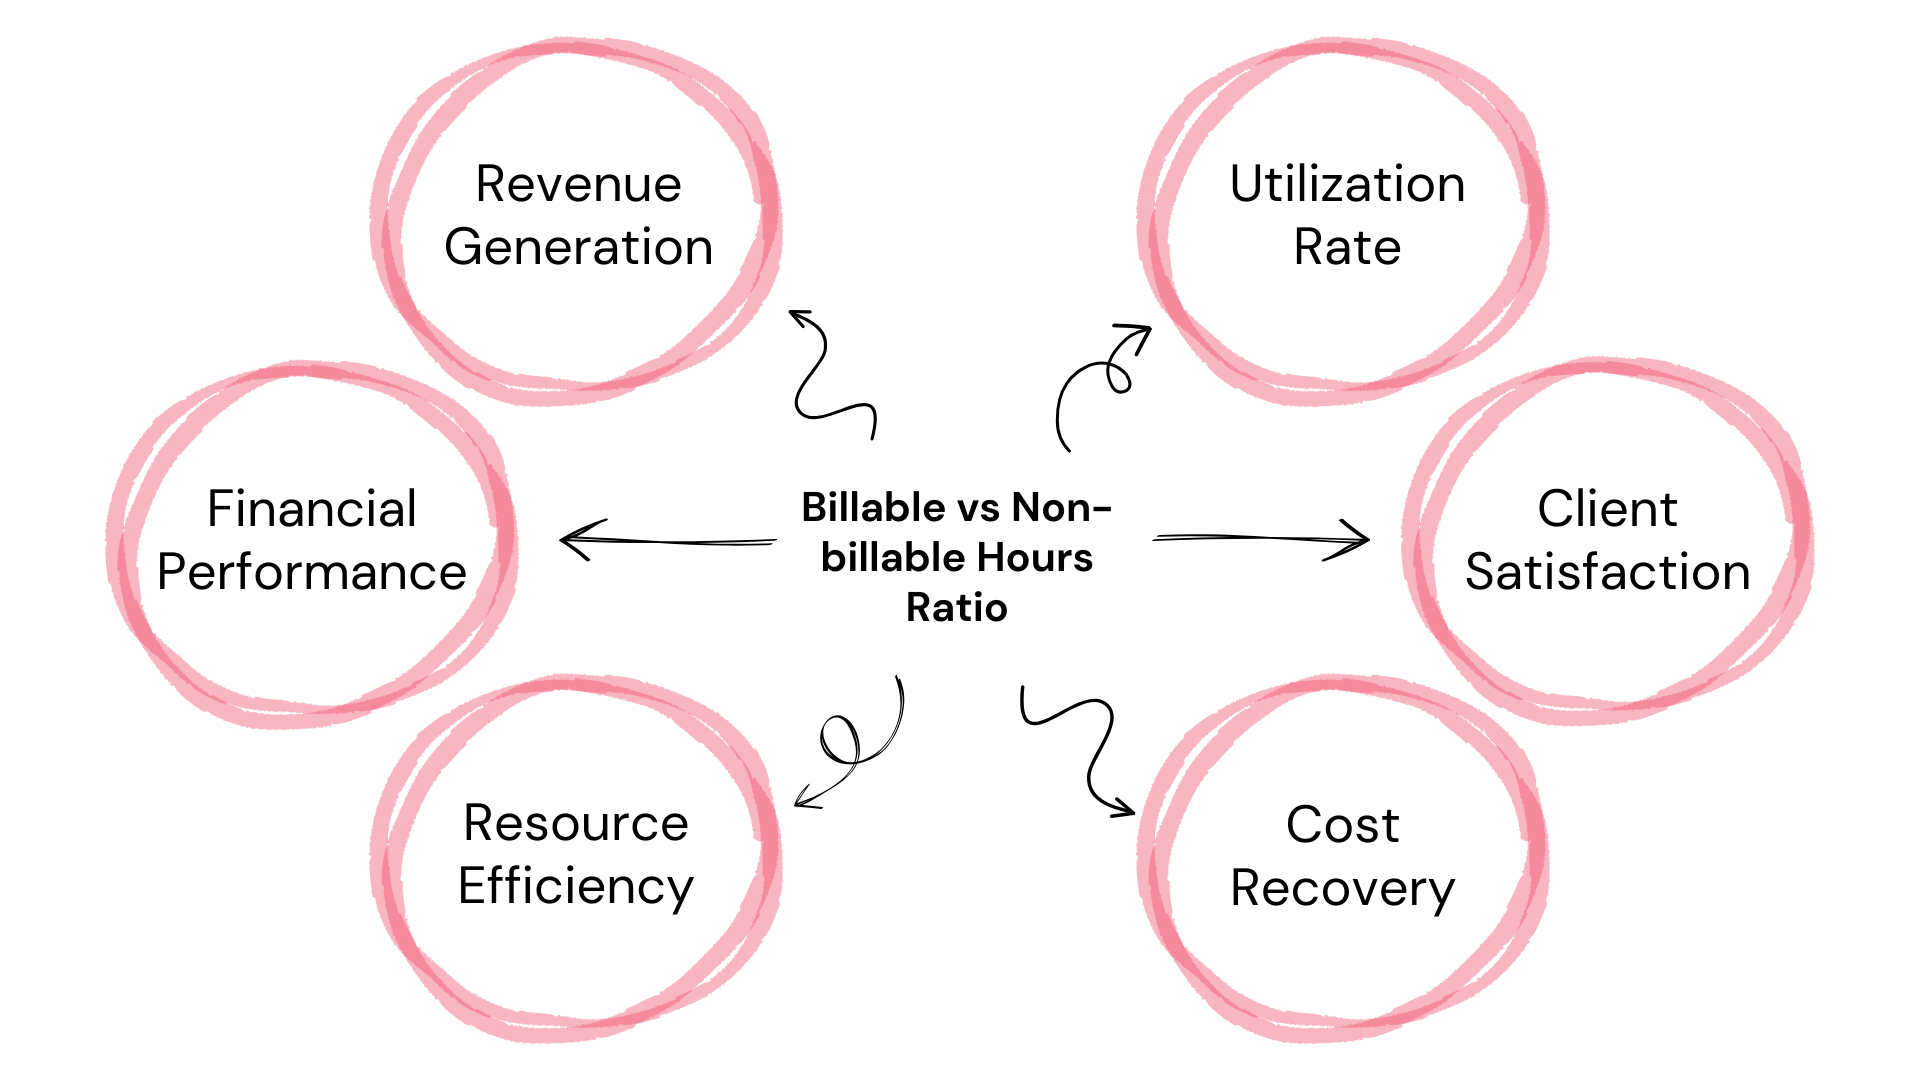 Importance of Billable vs Non-billable Hours Ratio